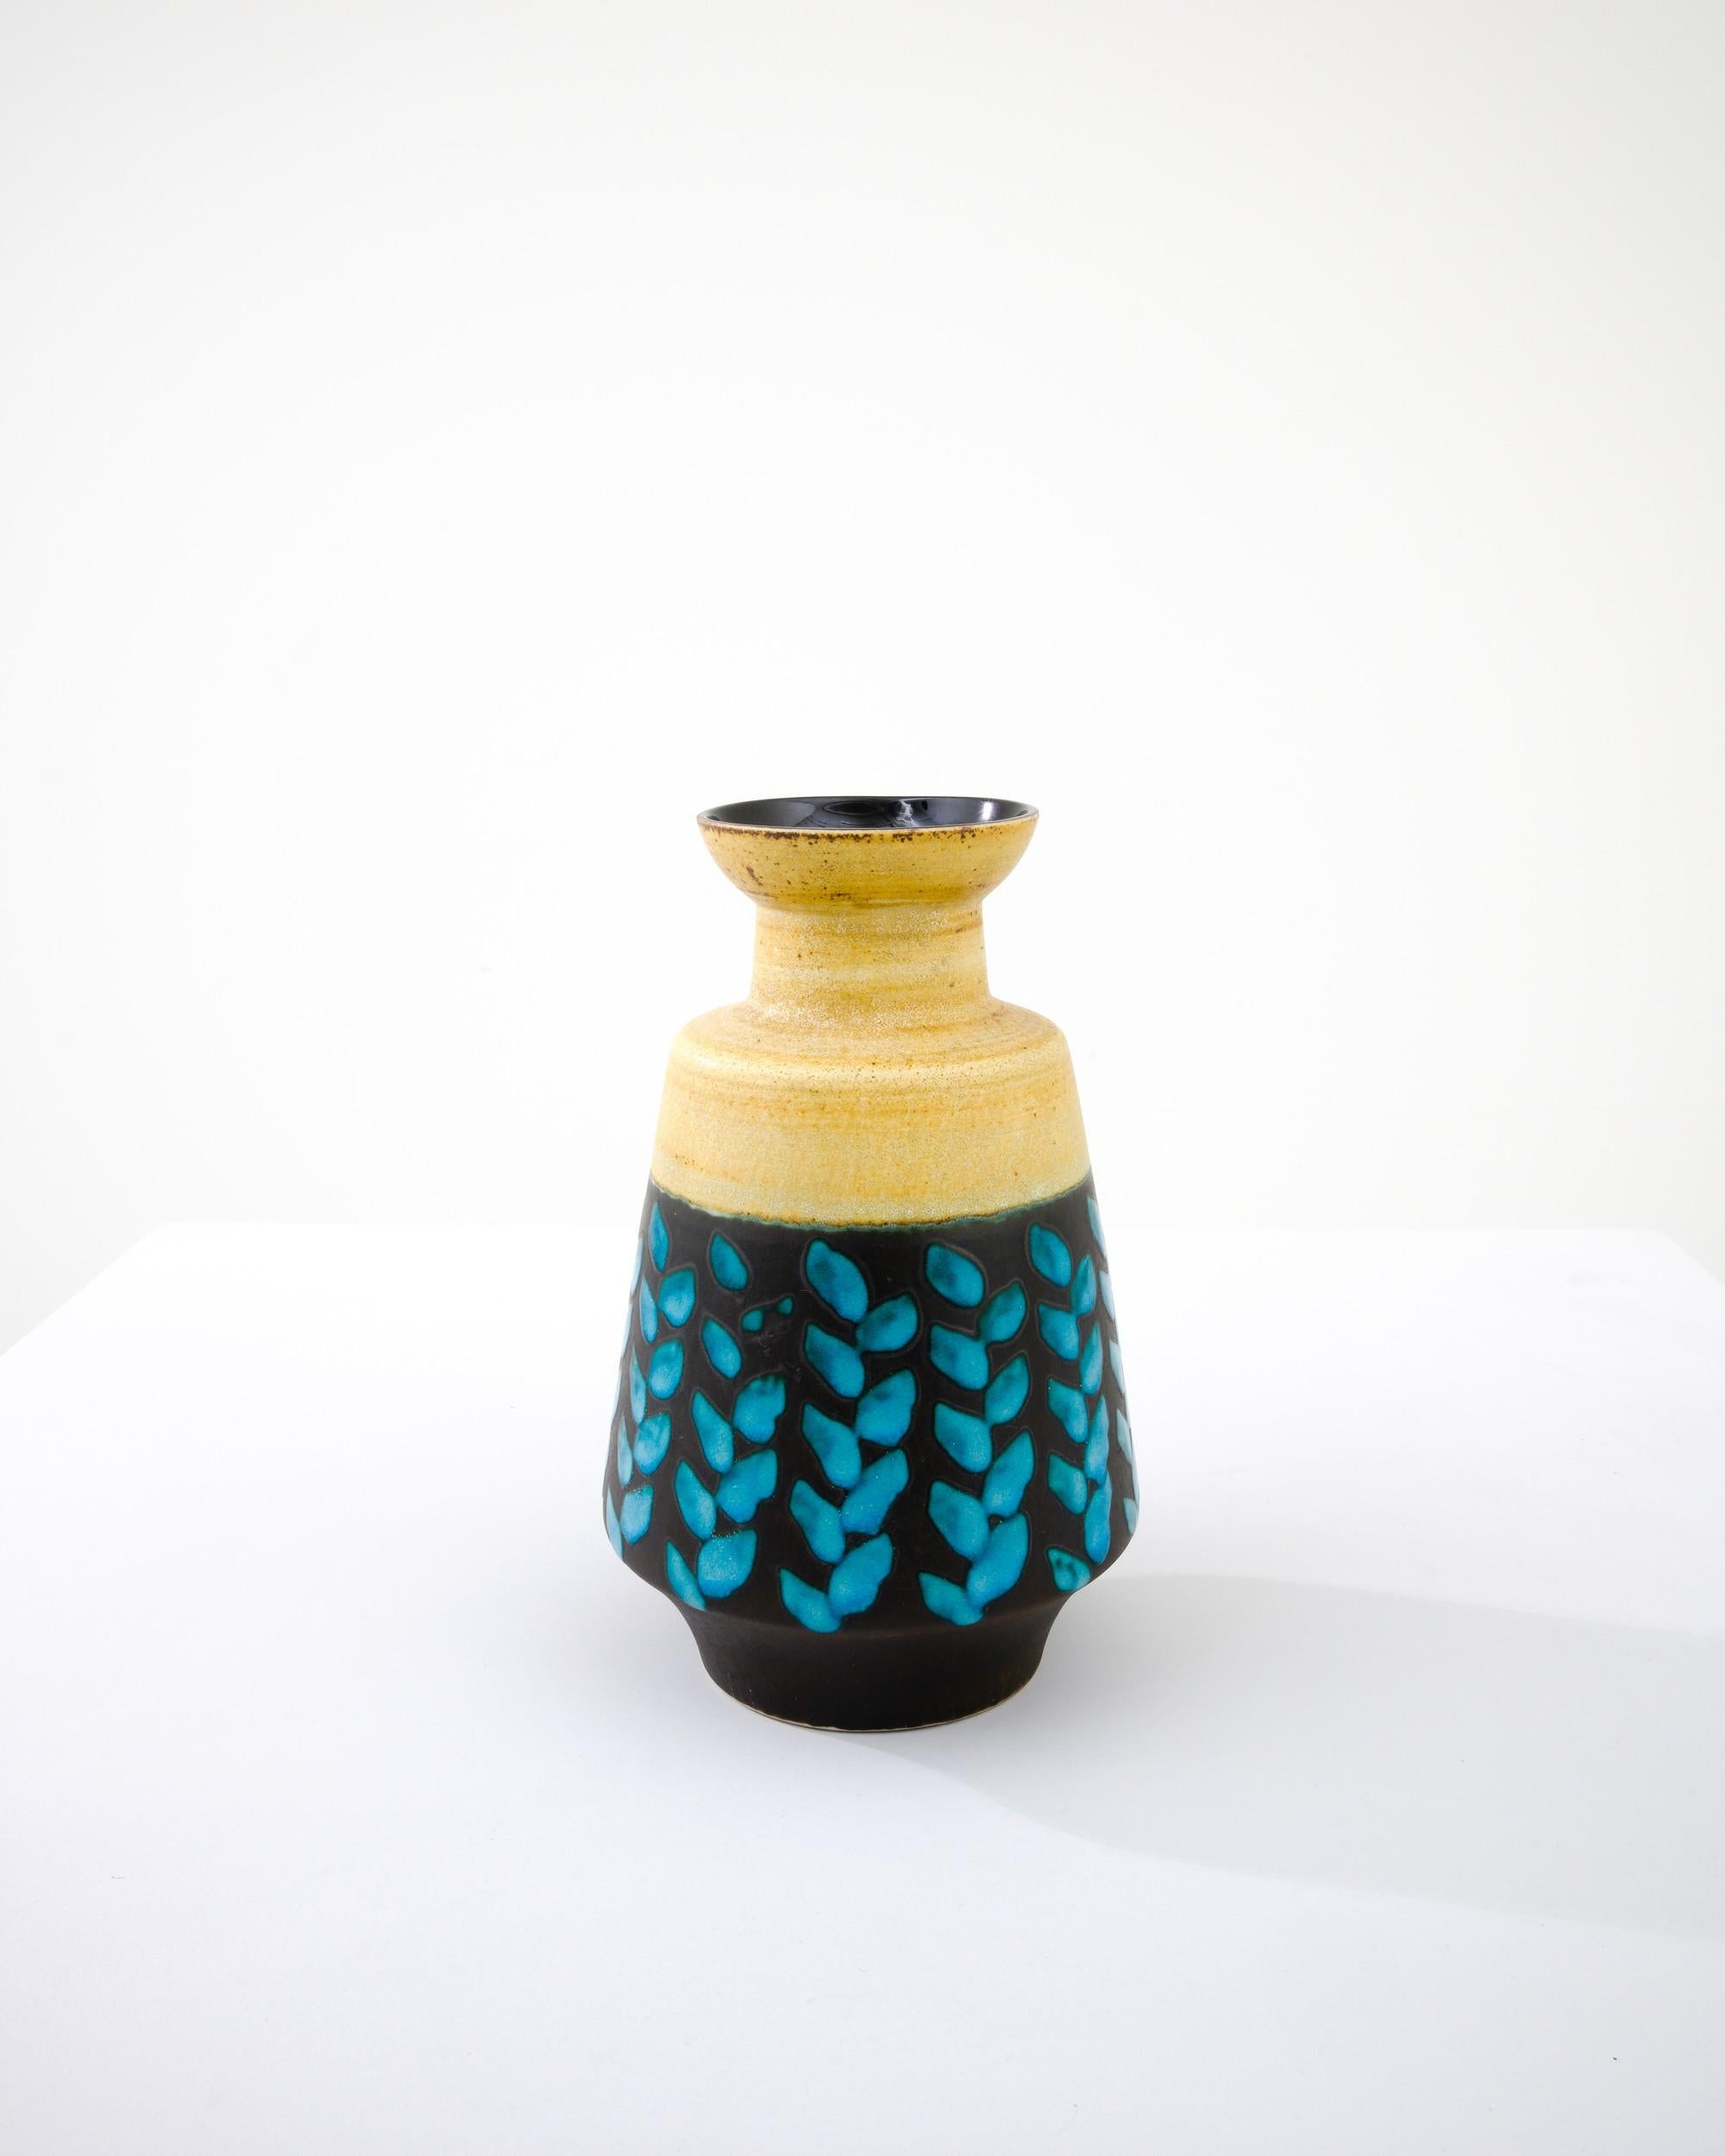 A ceramic vase from mid-20th century Germany. Neither large nor small, this studio made pot reflects the hand-held, and the handmade; the tactility of process and the artist's vision– realized on the potter’s wheel. Vibrant colors wrap the minimal